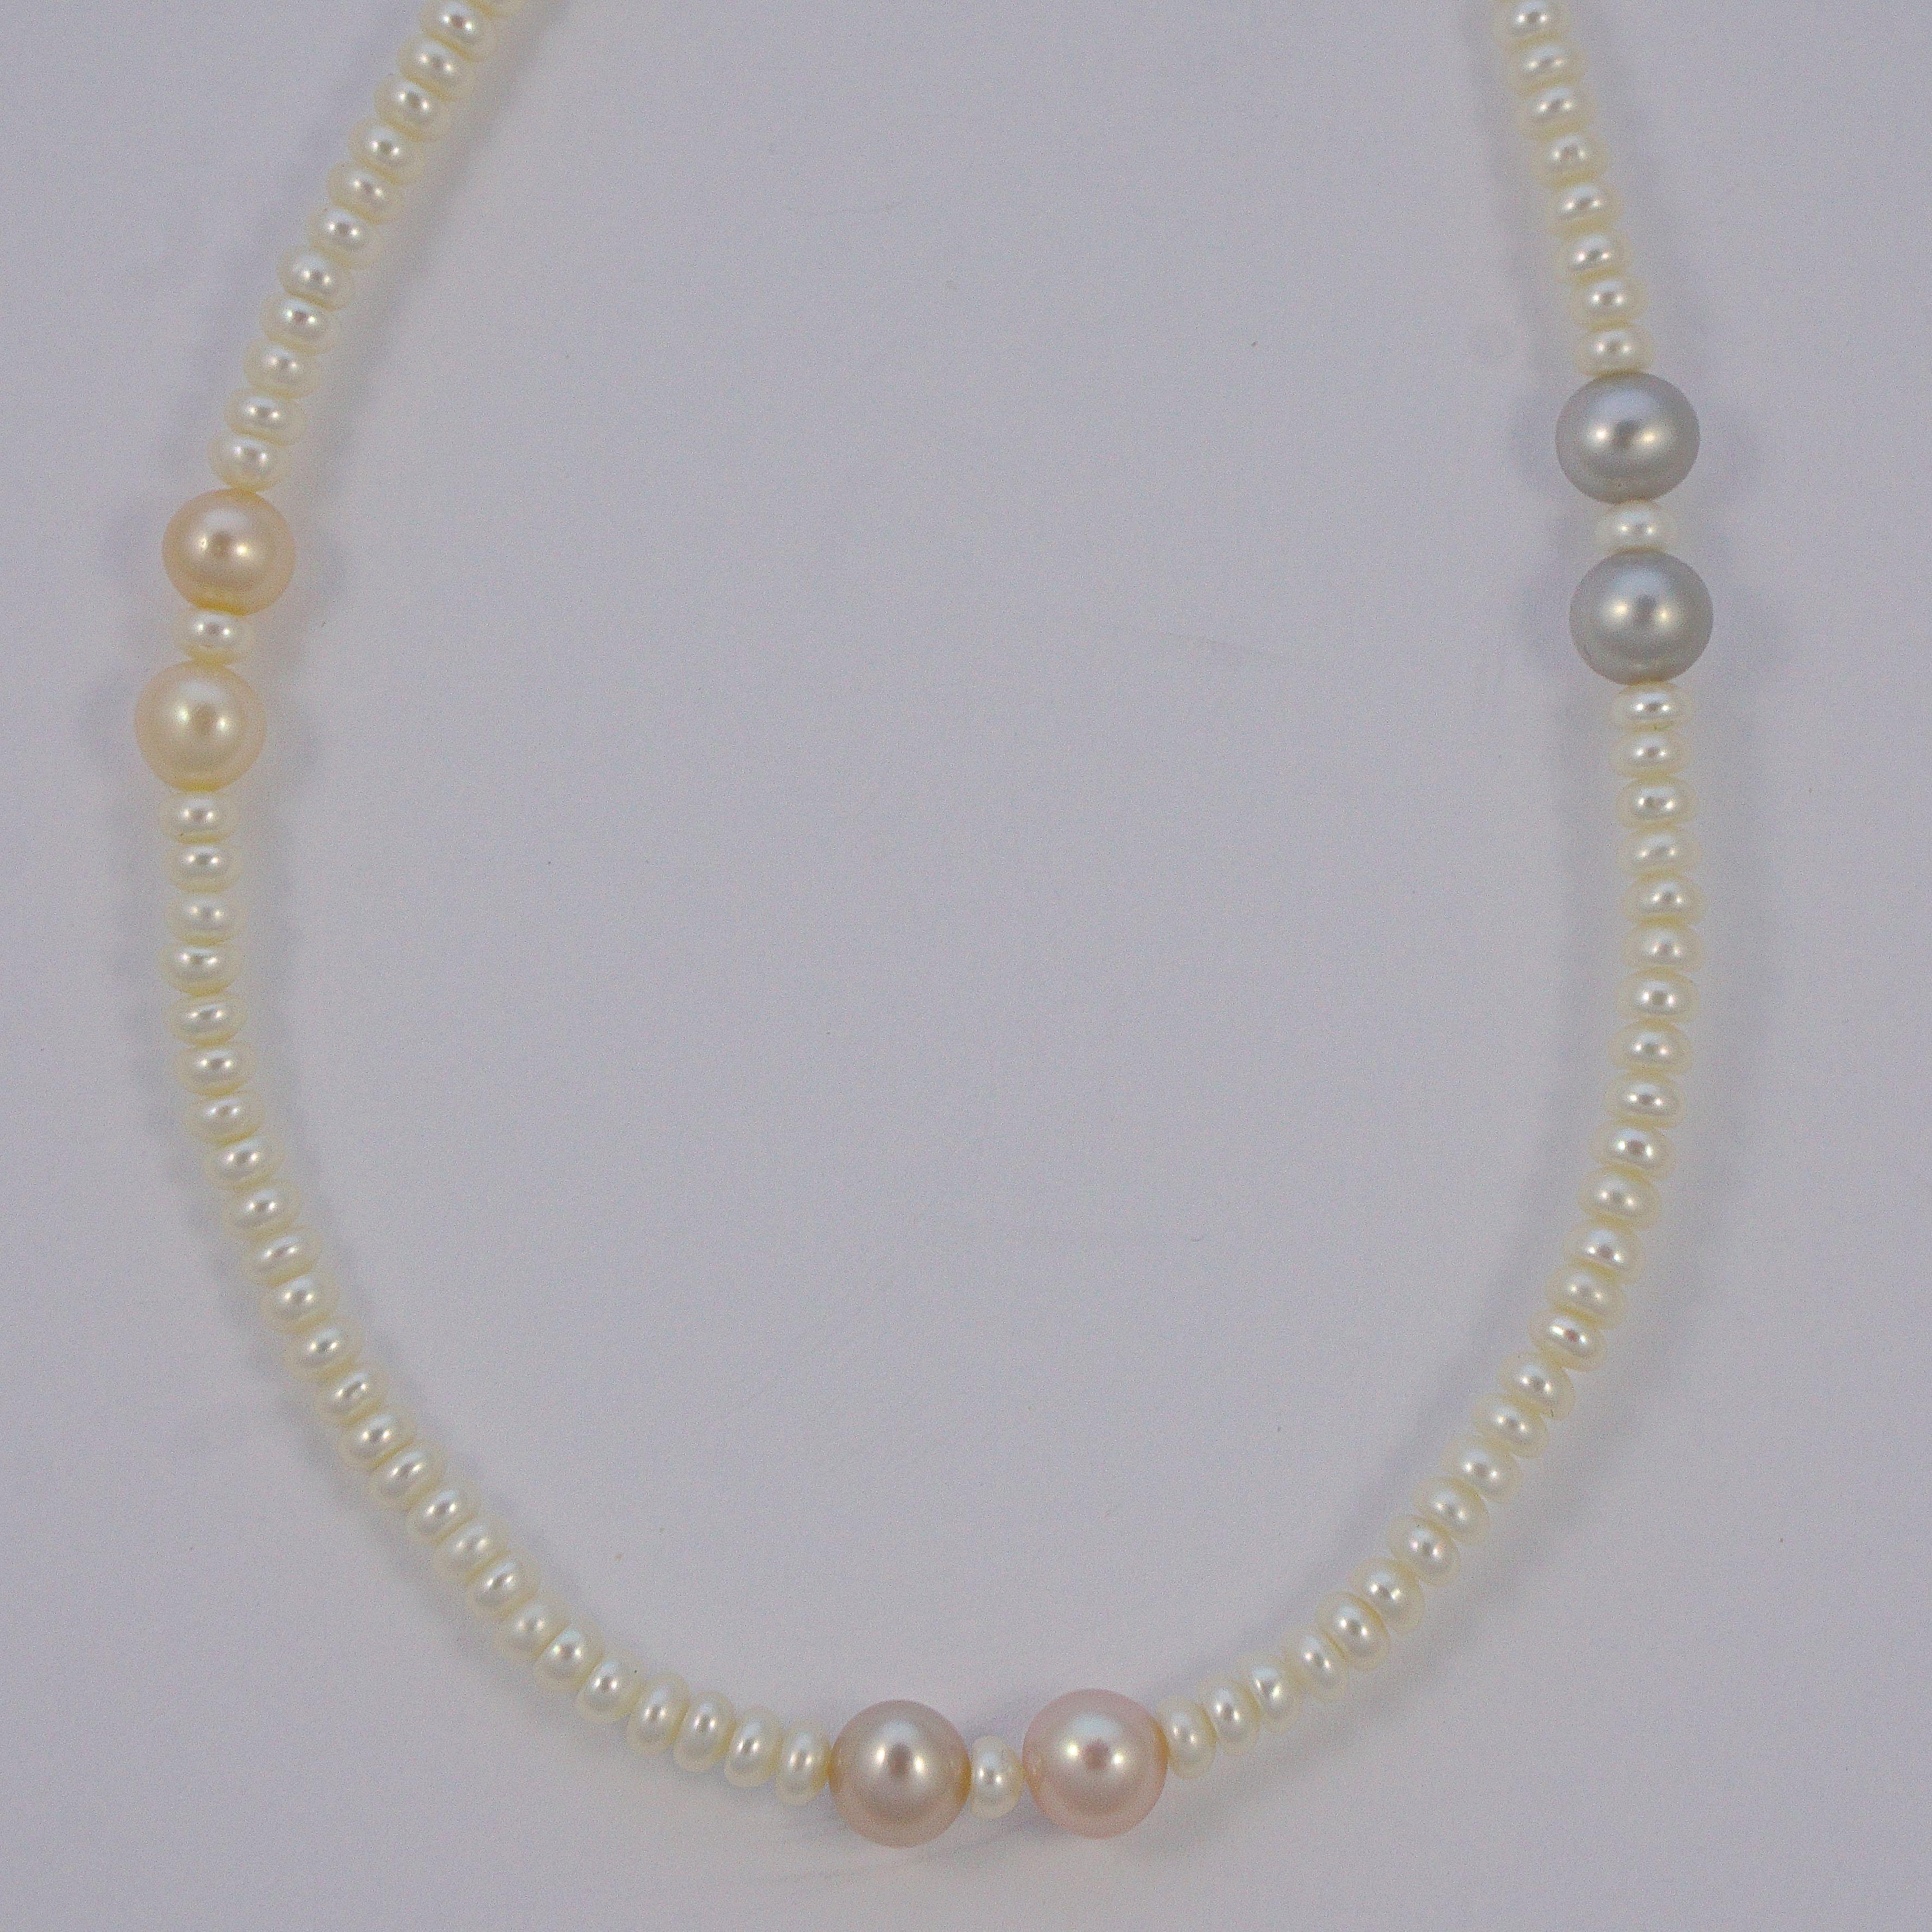 Wonderful Honora strand of white cultured pearls, with larger pearls in grey, peach and pink. The necklace is length 87cm / 34.25 inches, the large pearls are 6mm / .23 inch, and the small white pearls are width 4mm / .15 inch. There is no clasp, so